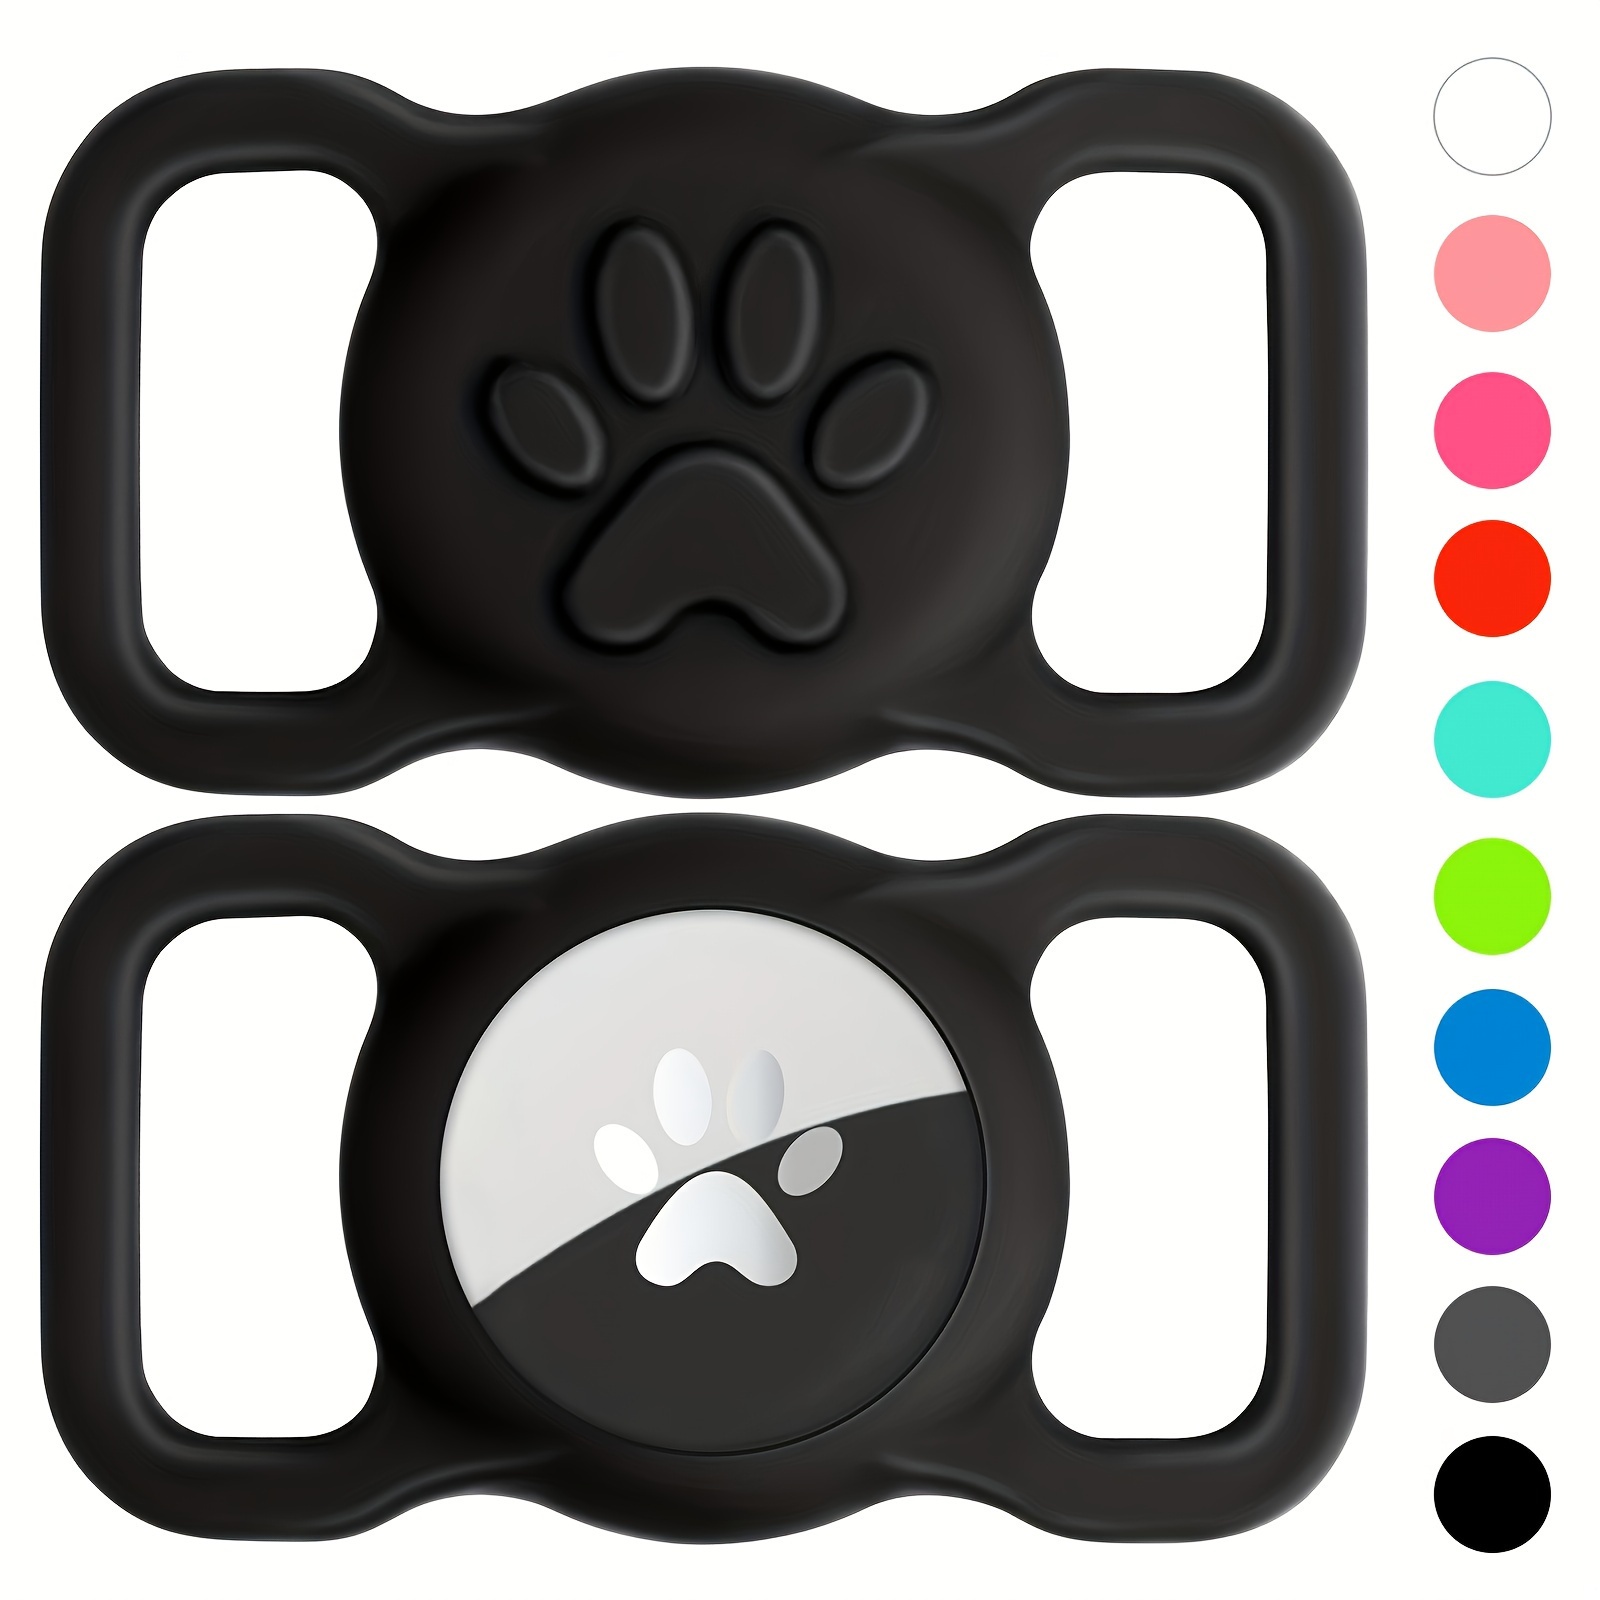 

2 Pack Joytale Waterproof Silicone Holder Case For Airtag For Dogs And Cats - Scratch-resistant, Anti-lost Gps Tracker For Airtags - Compatible With Collar Bells - Protect Your Pet With Peace Of Mind